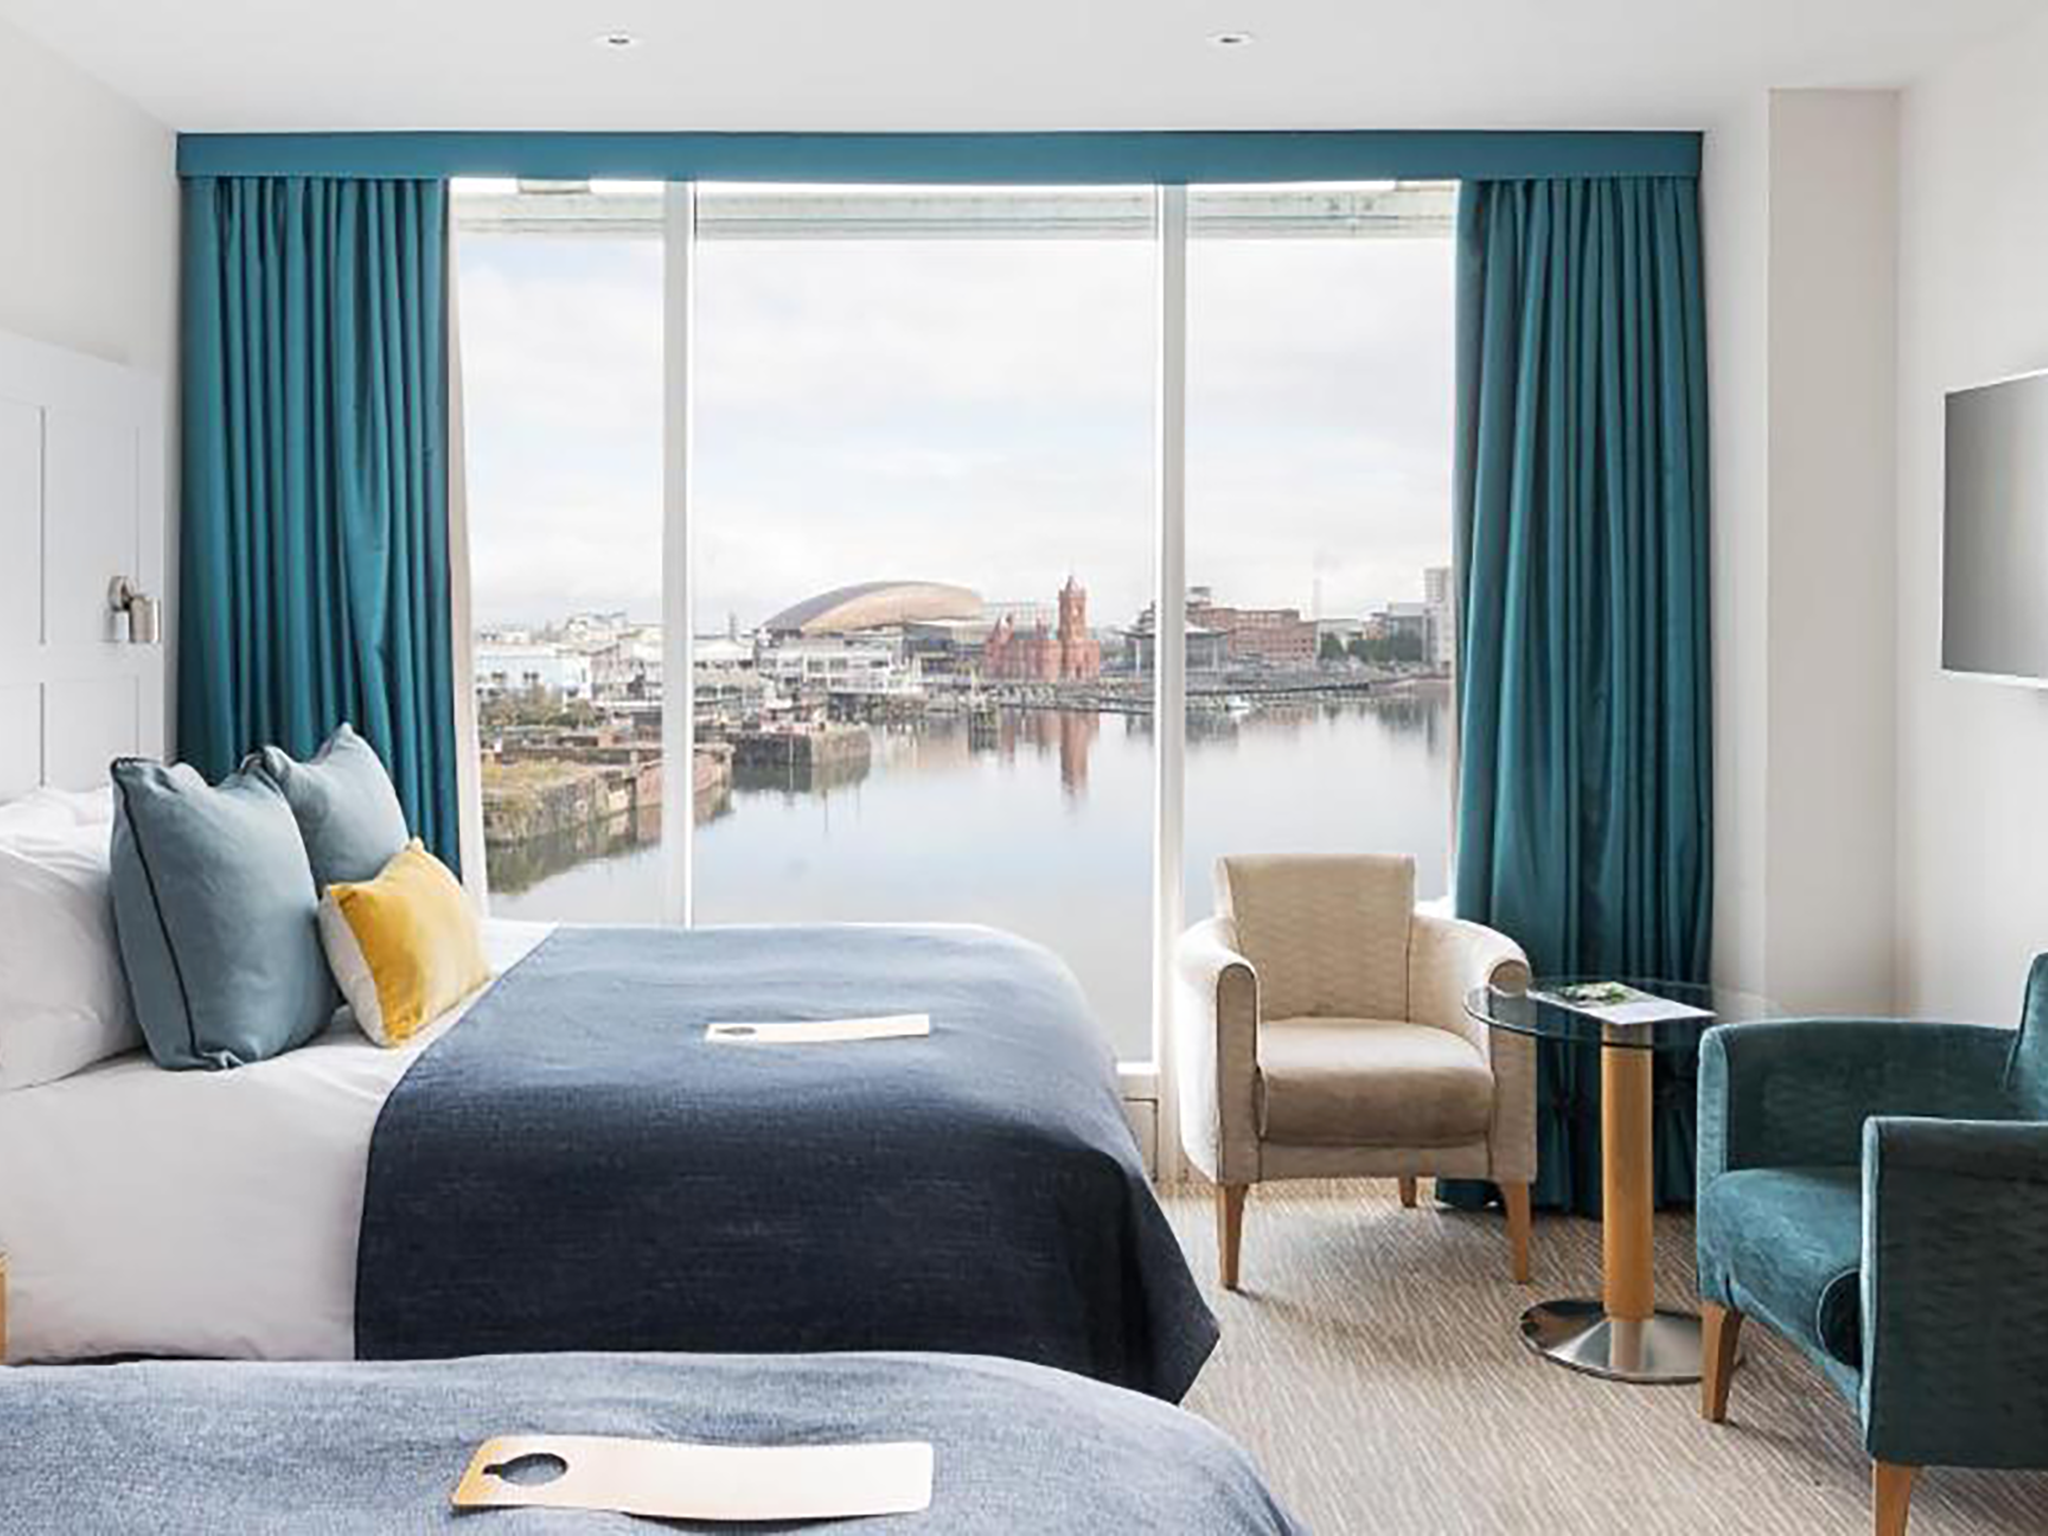 This hotel comes with dreamy views across the water